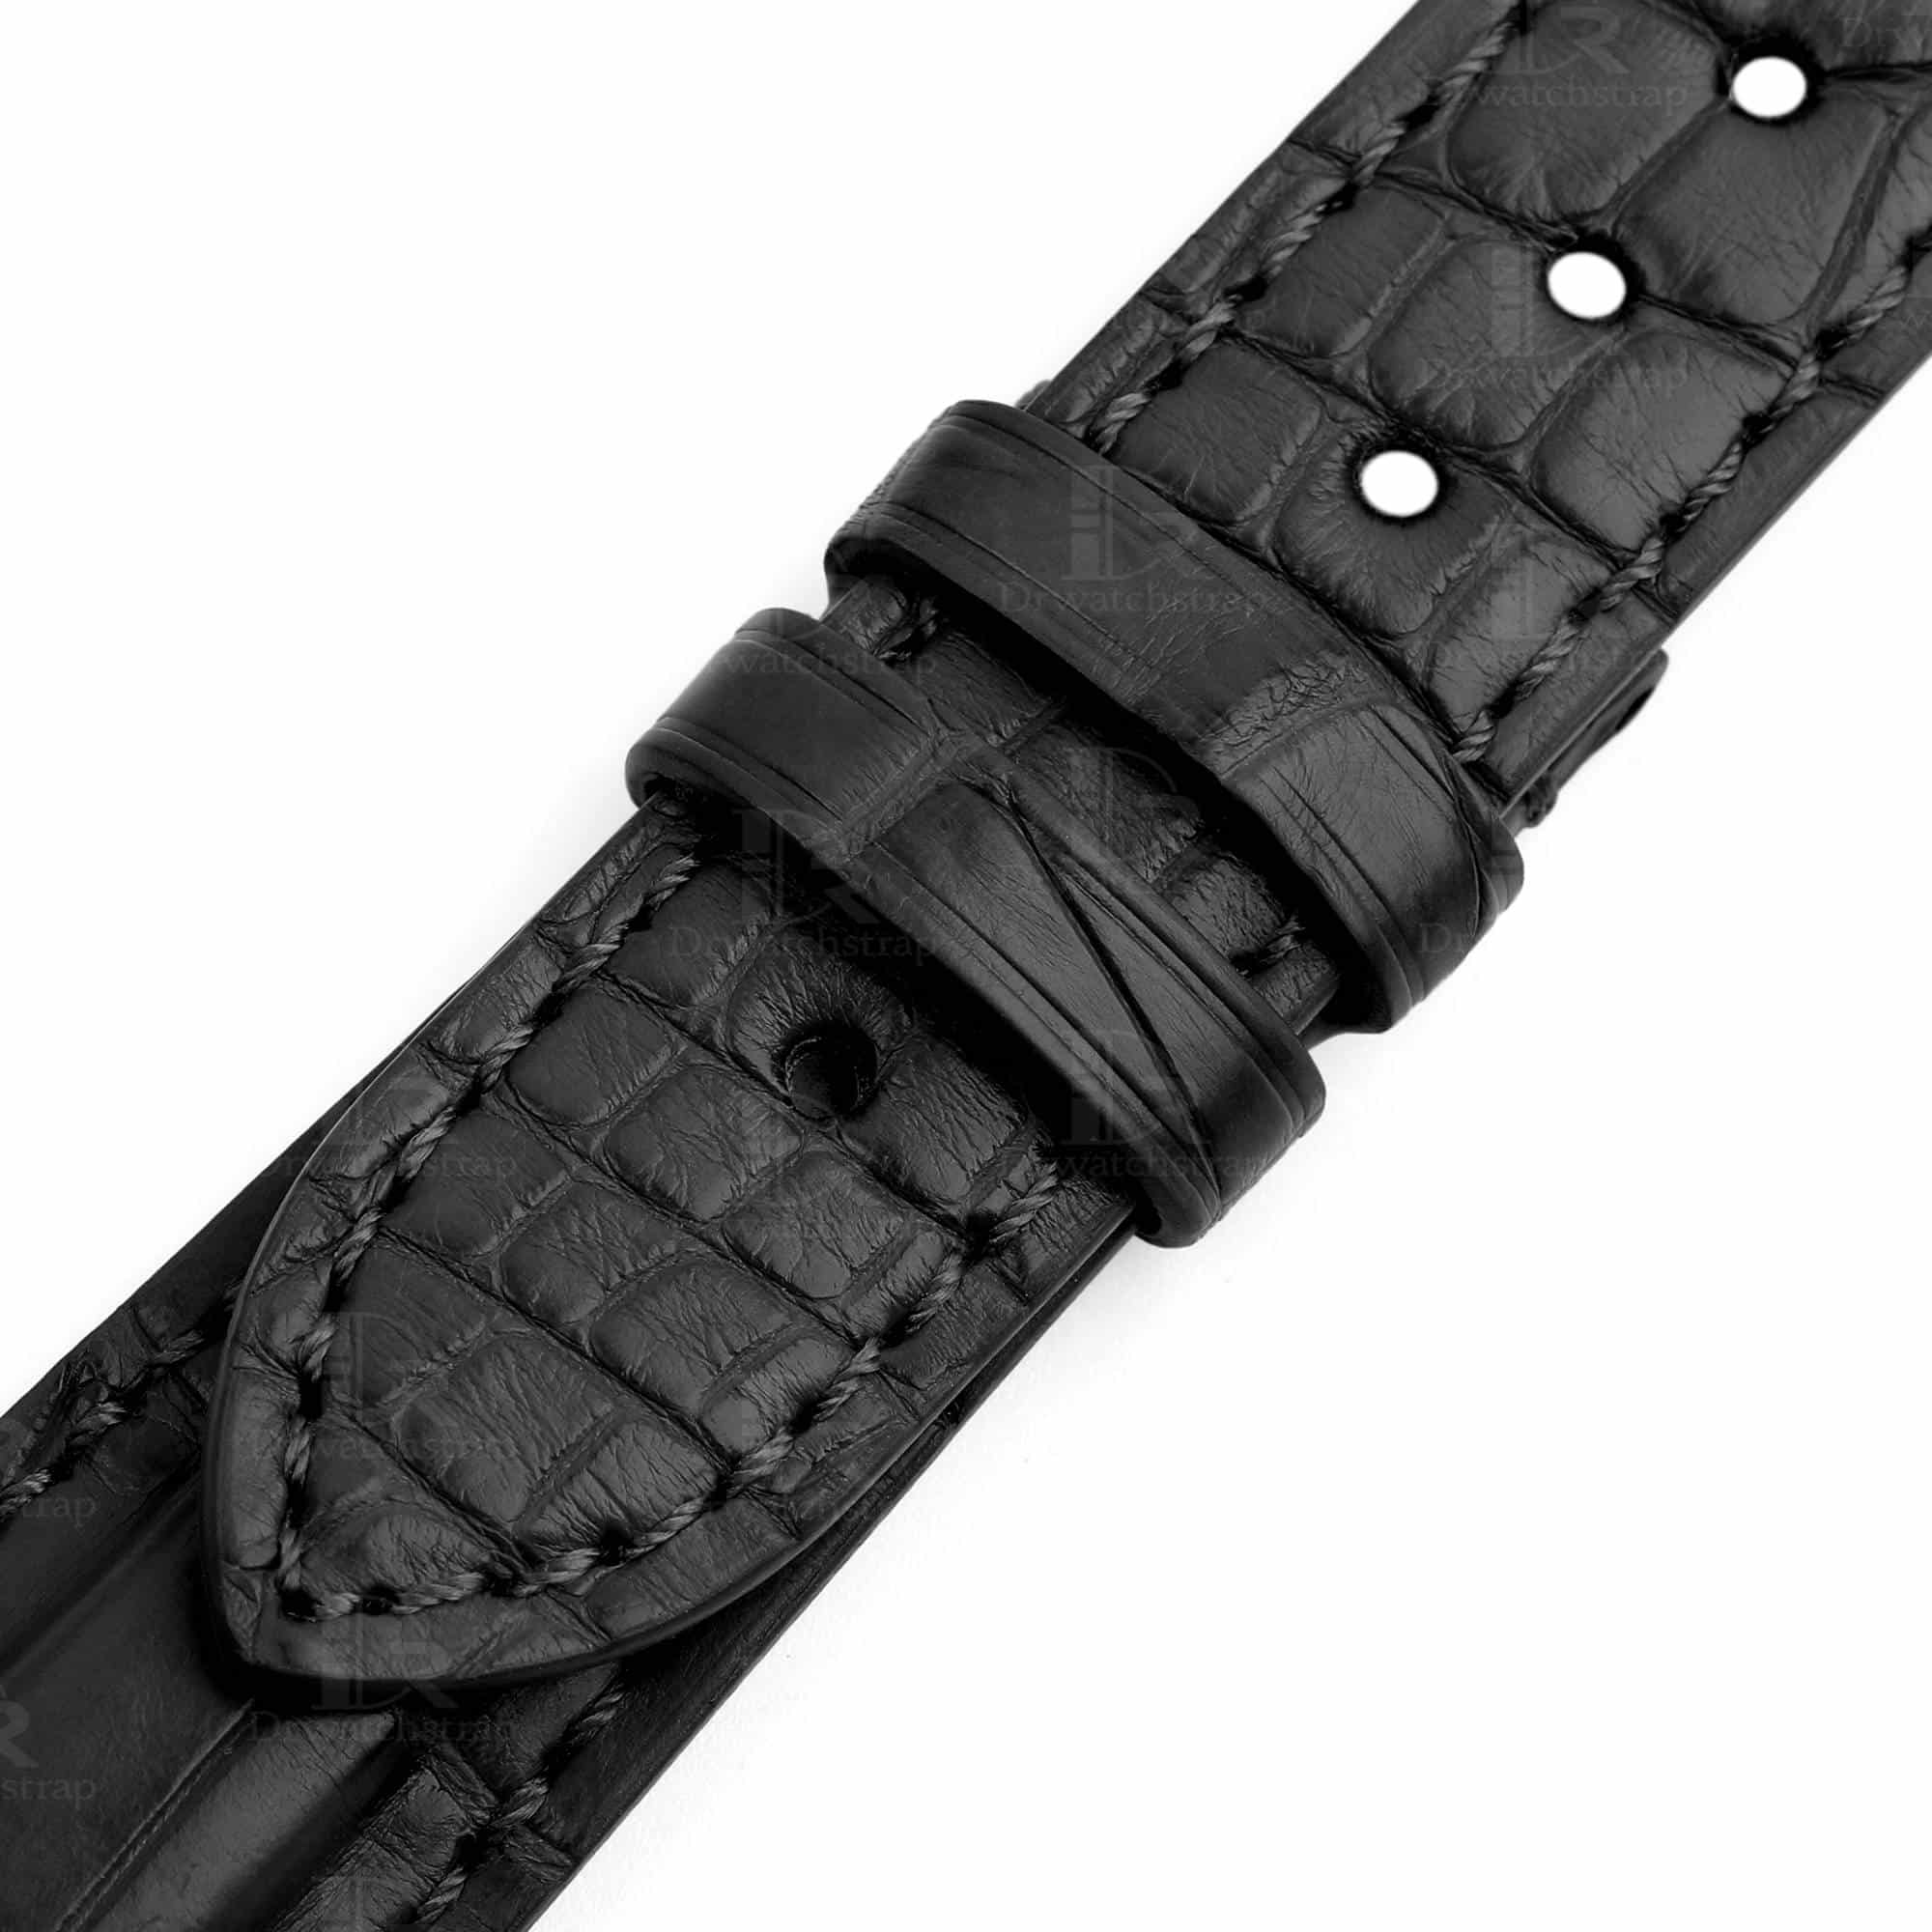 Custom aftermarket black alligator crocodile replacement alligator leather watch strap and watch band for Bvlgari Diagono Aluminium al38a L3276 luxury watches bands online at a low price for mens ladies from dr watchstrap